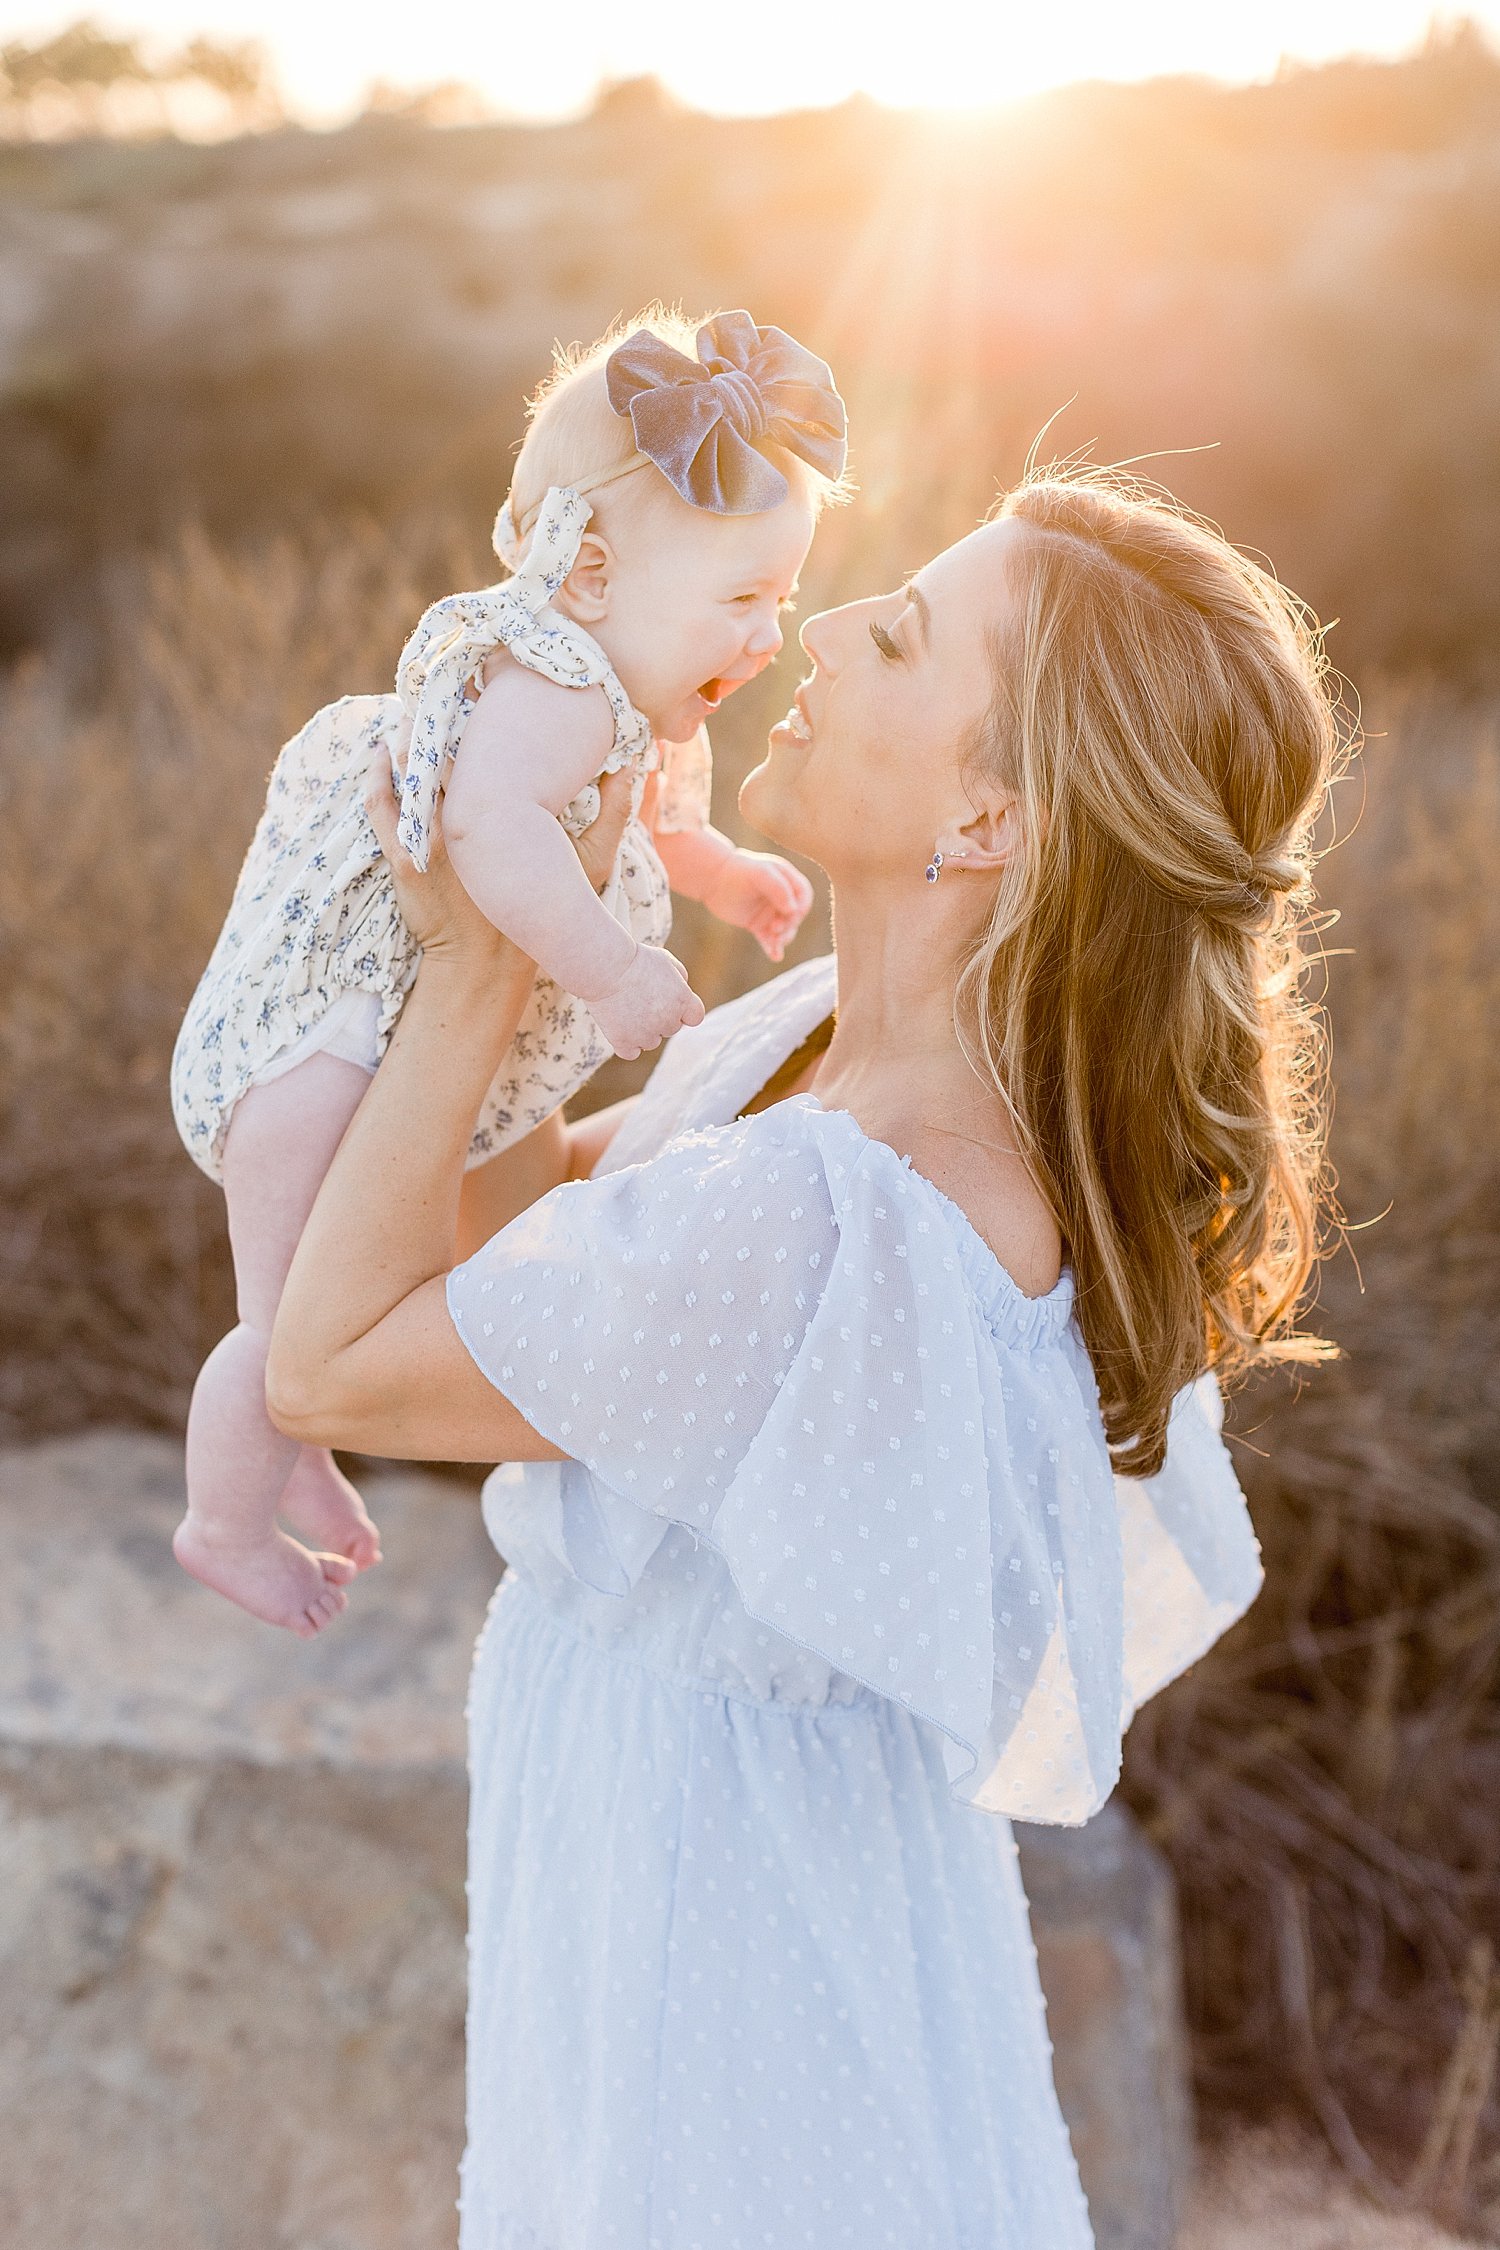 Mom holding her baby girl up and kissing her | Photo by Ambre Williams Photography